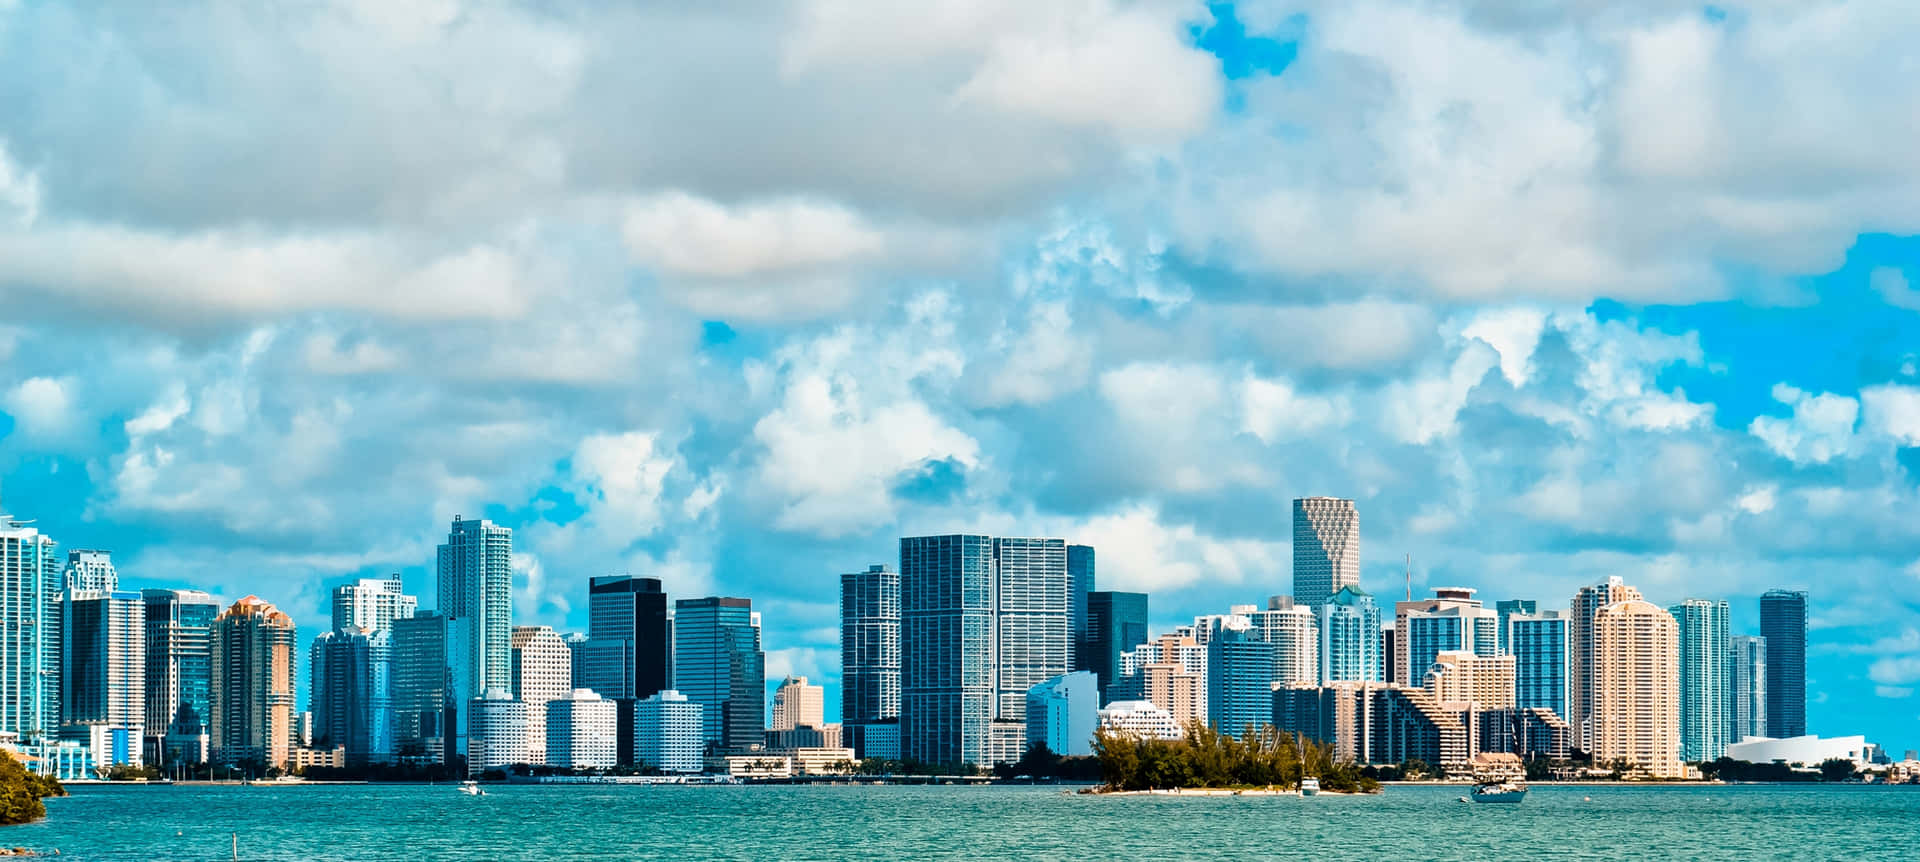 Picturesque Tampa Bay, Florida